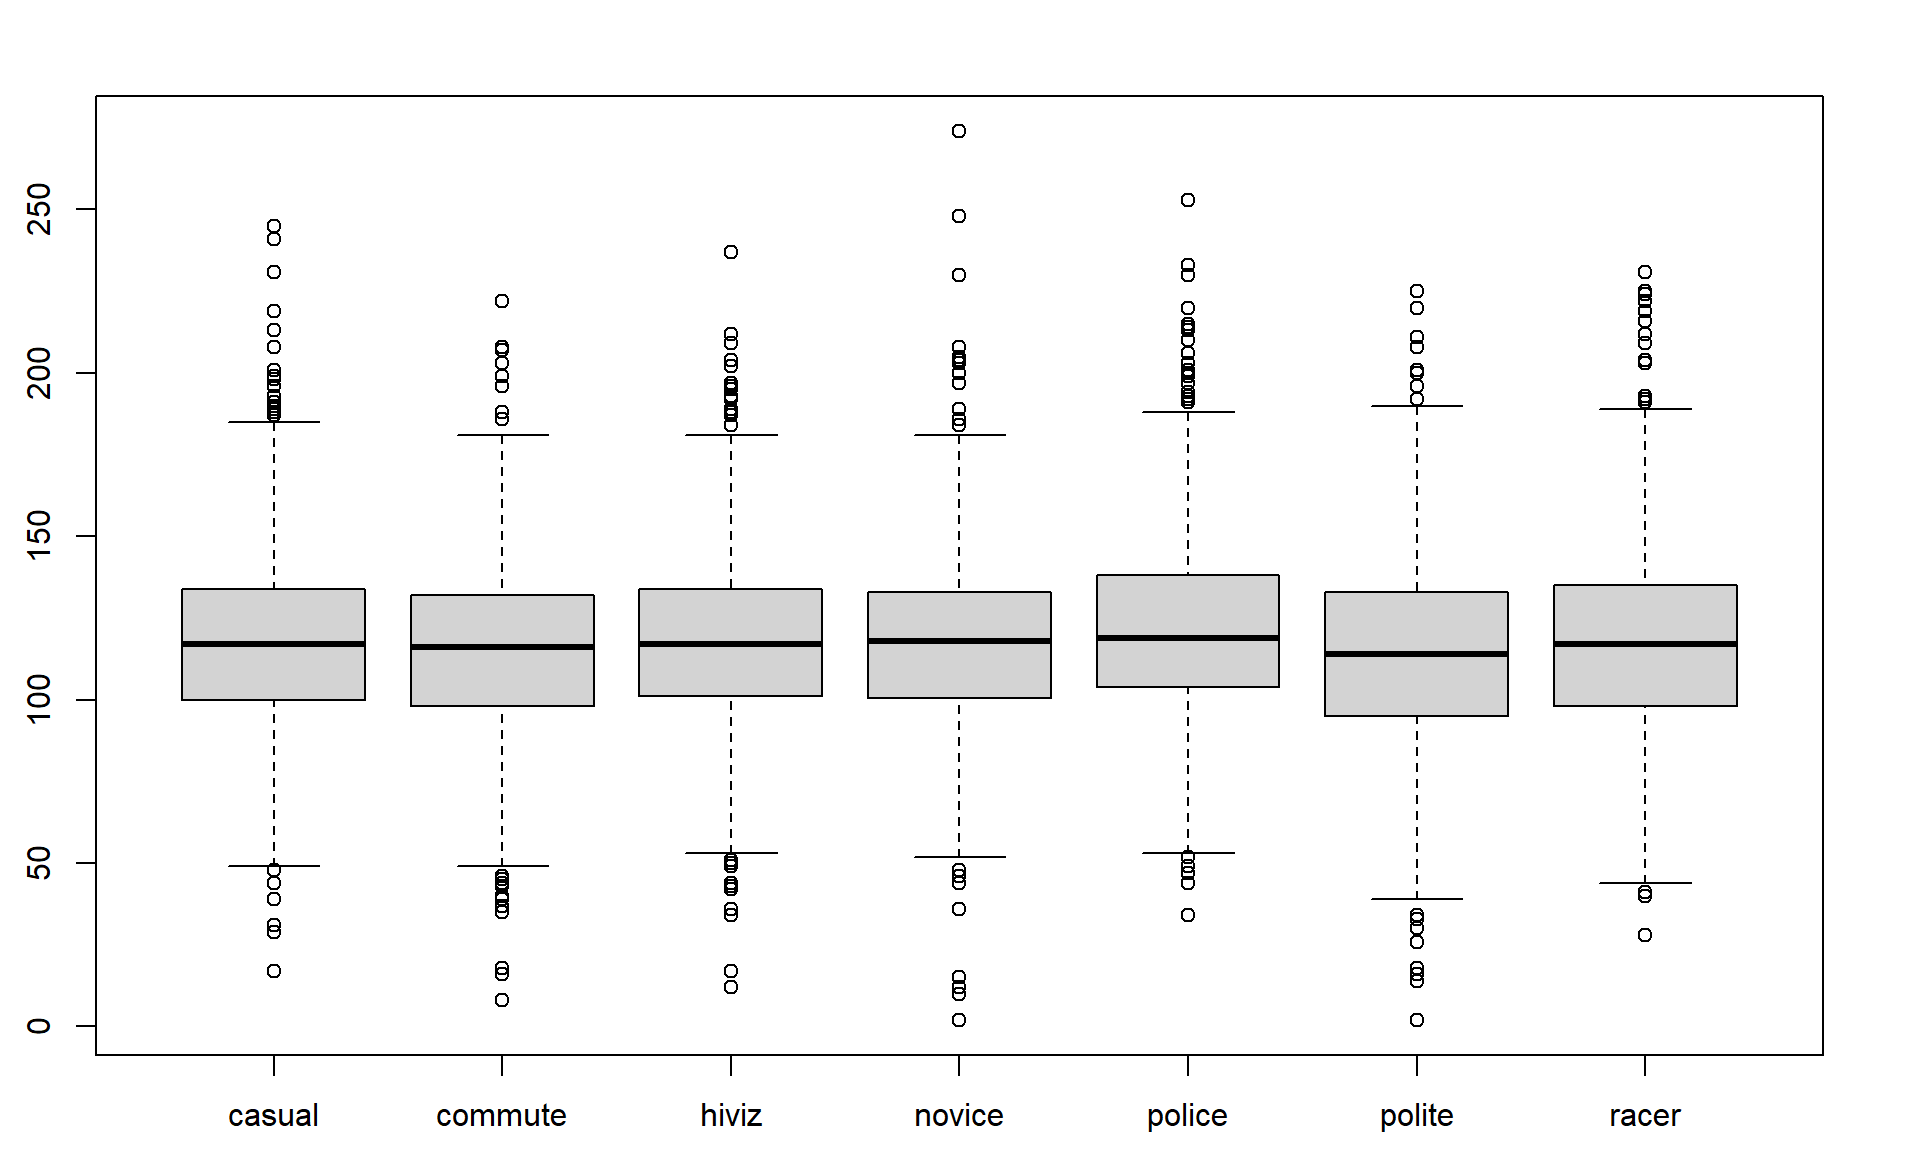 Side-by-side boxplot of distances based on outfits.